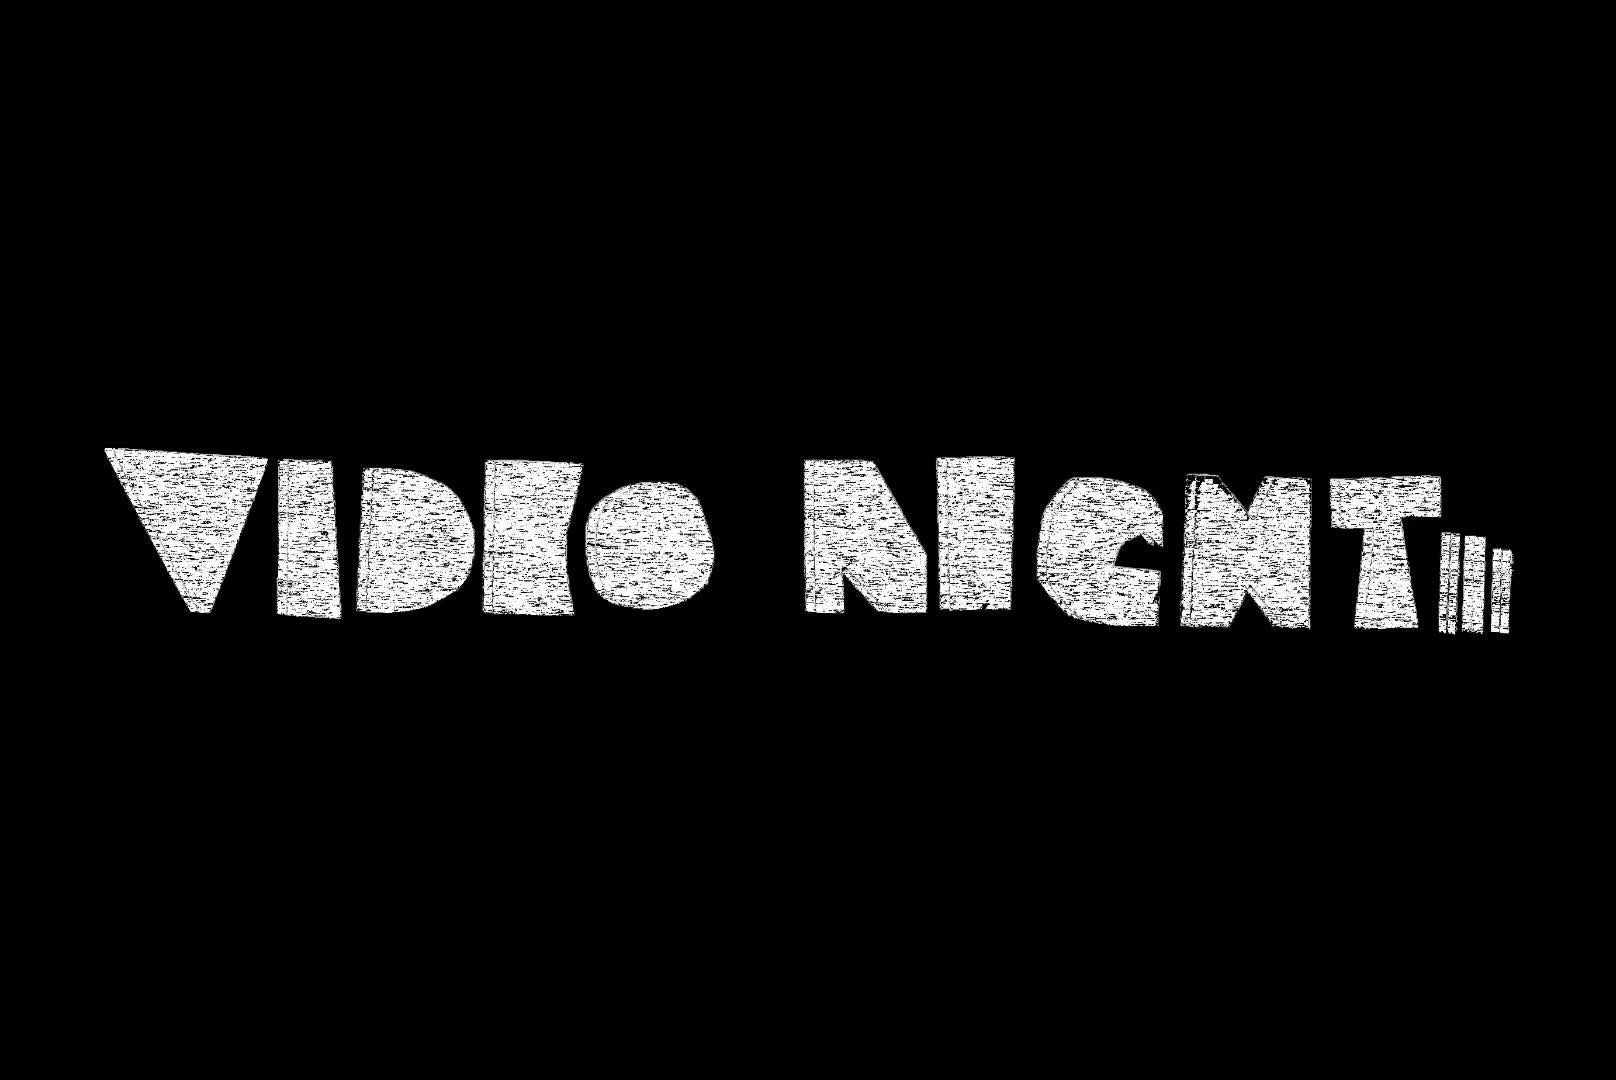 trailer for the exhibition this weekend… ‘video night 3’ opens on Friday night, from 6-12, and runs until Sunday. Curated by @sumsonya & featuring the work of @megandidthat @kyrin_c_ @doramaludi @yz.hazel @david_varhegyi @archietaylor @limbsprojects & more